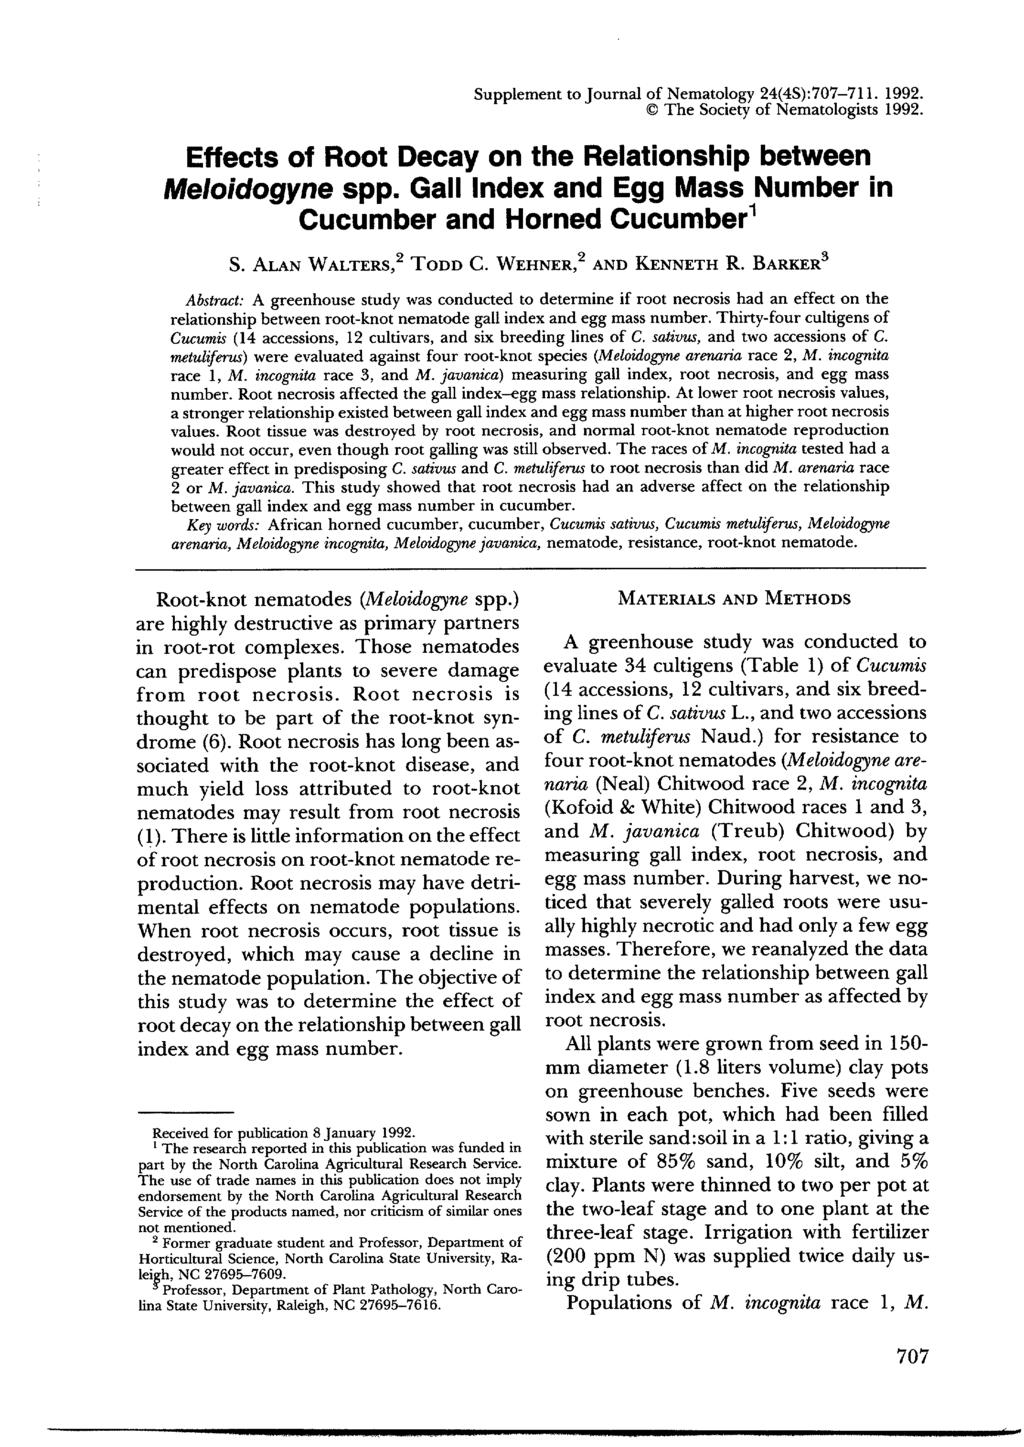 Supplement to Journal of Nematology 24(4S):707-711. 1992. The Society of Nematologists 1992. Effects of Root Decay on the Relationship between Meloidogyne spp.